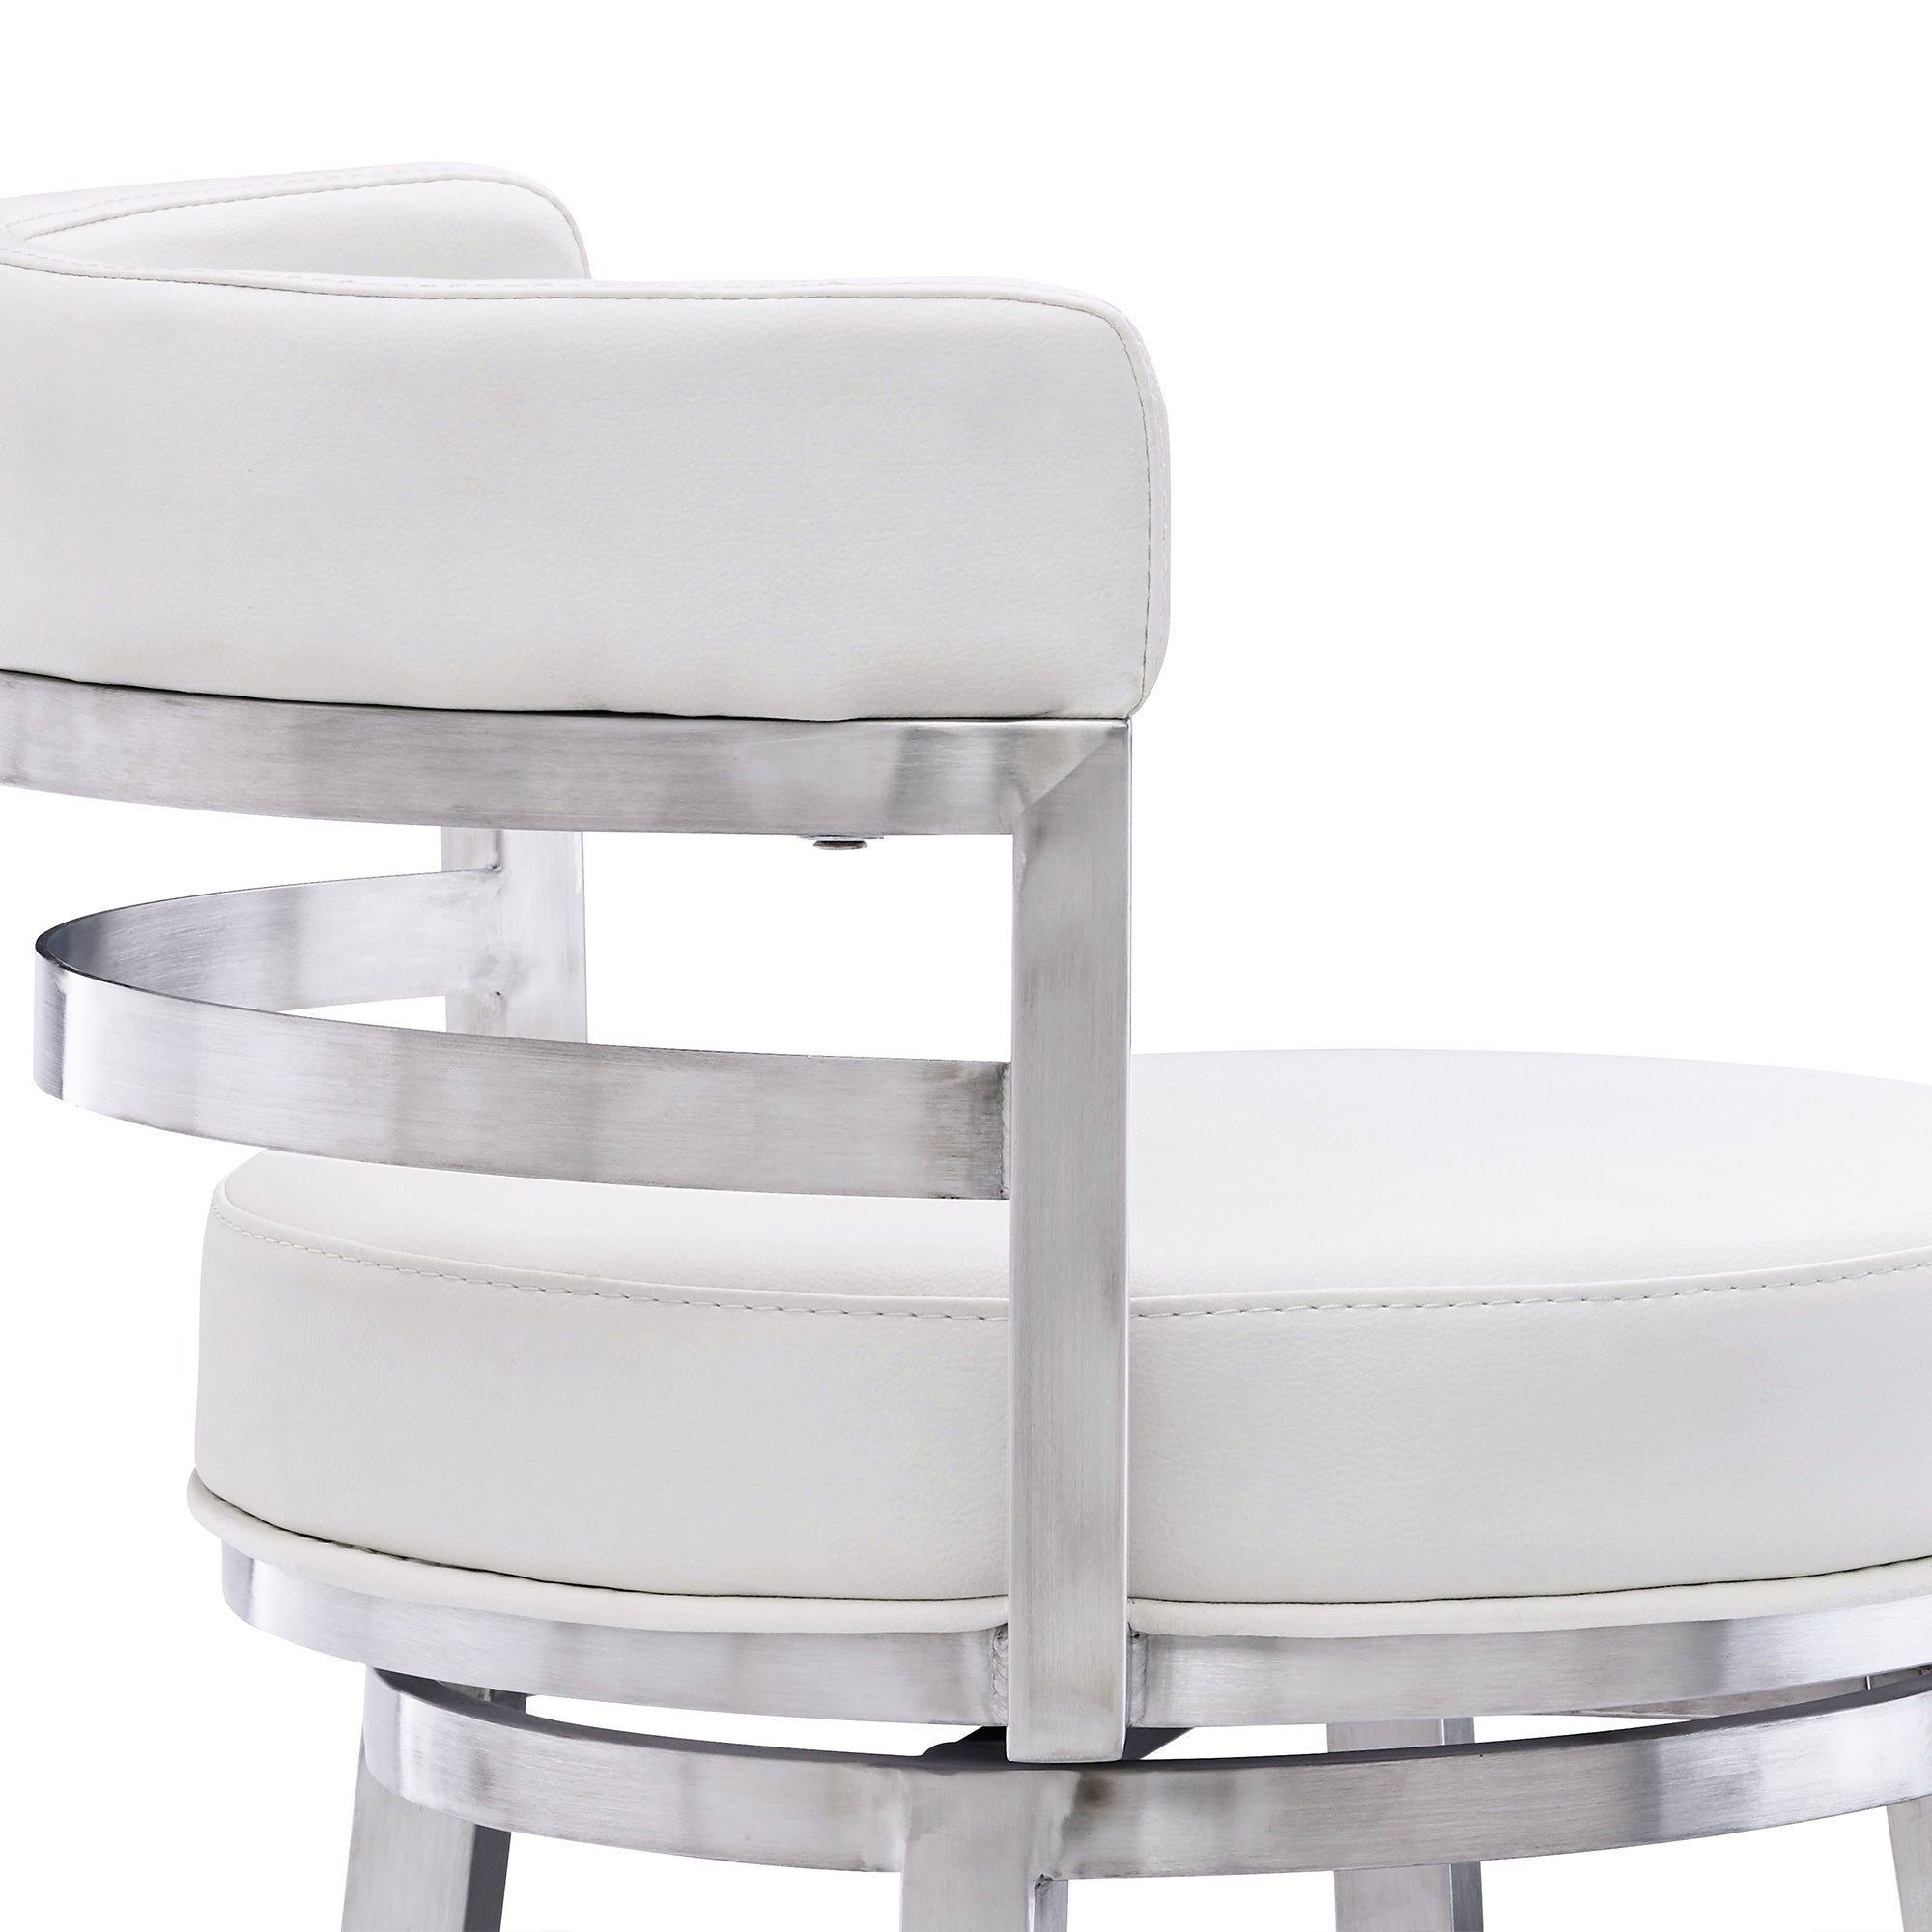 Armen Living - Titana Bar or Counter Stool in White Faux Leather and Metal - 840254335080